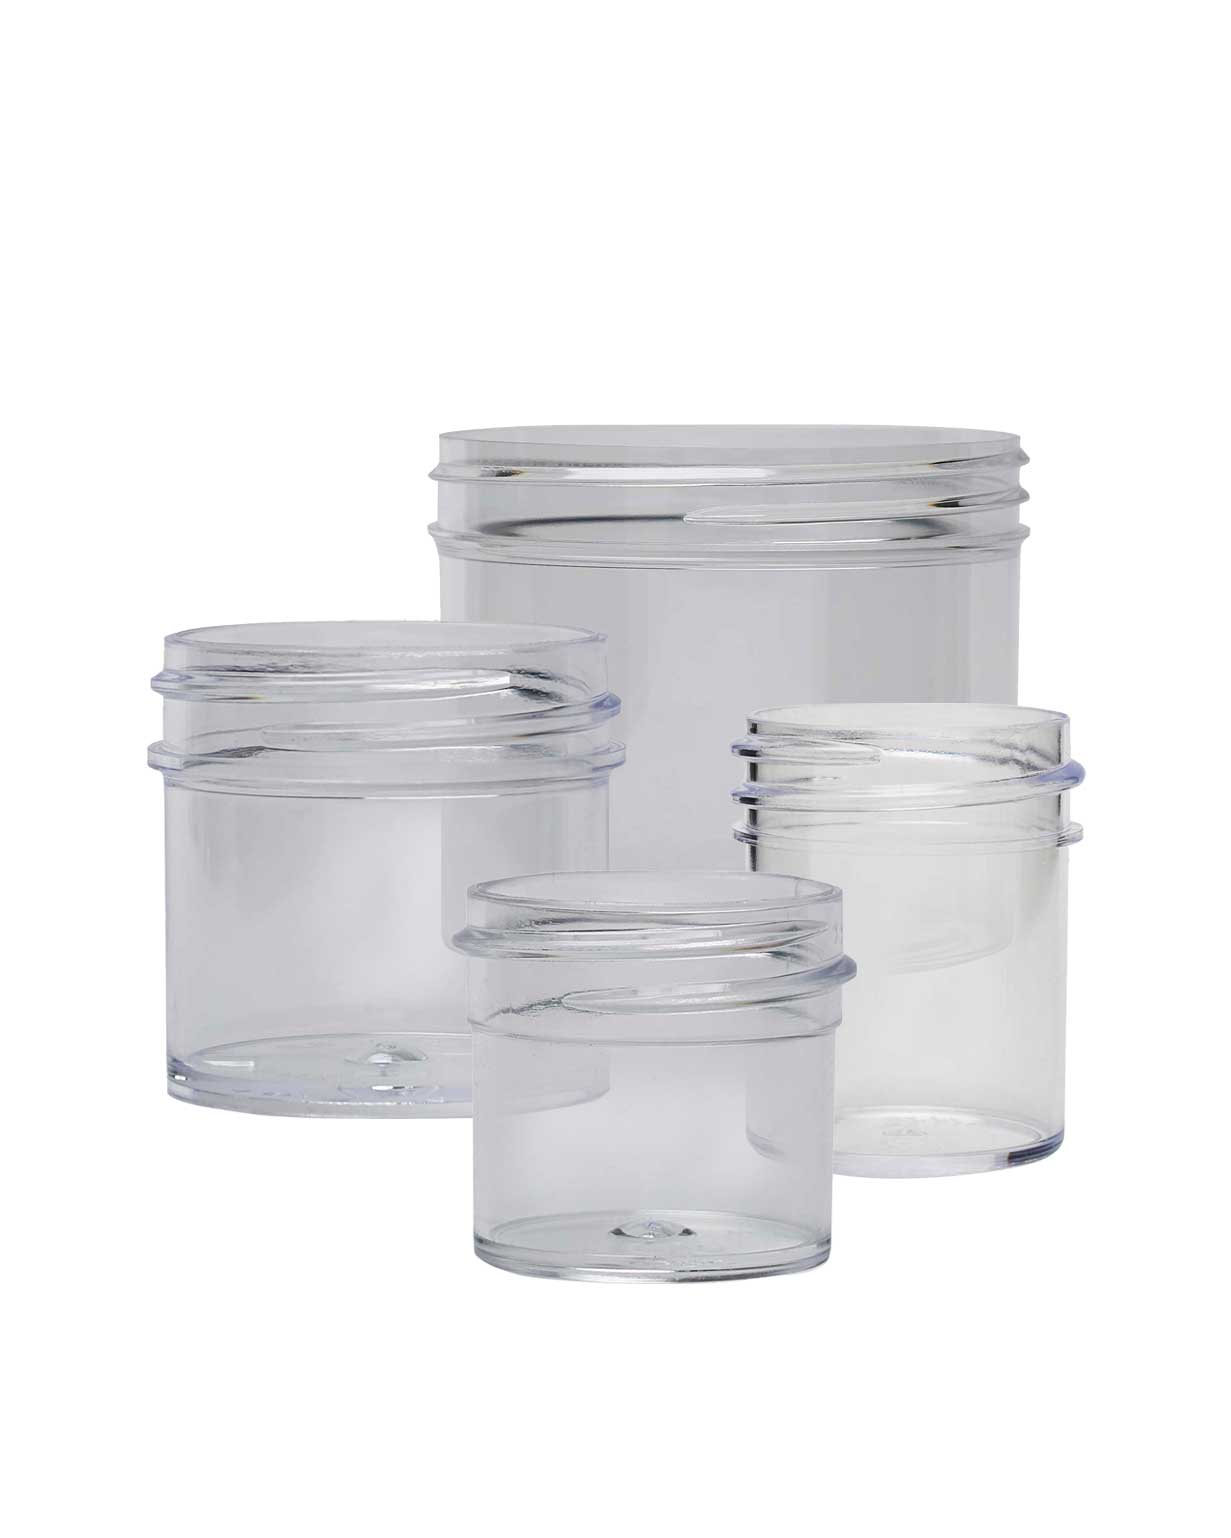 Plastic Wide Mouth Jars - Paramount Global